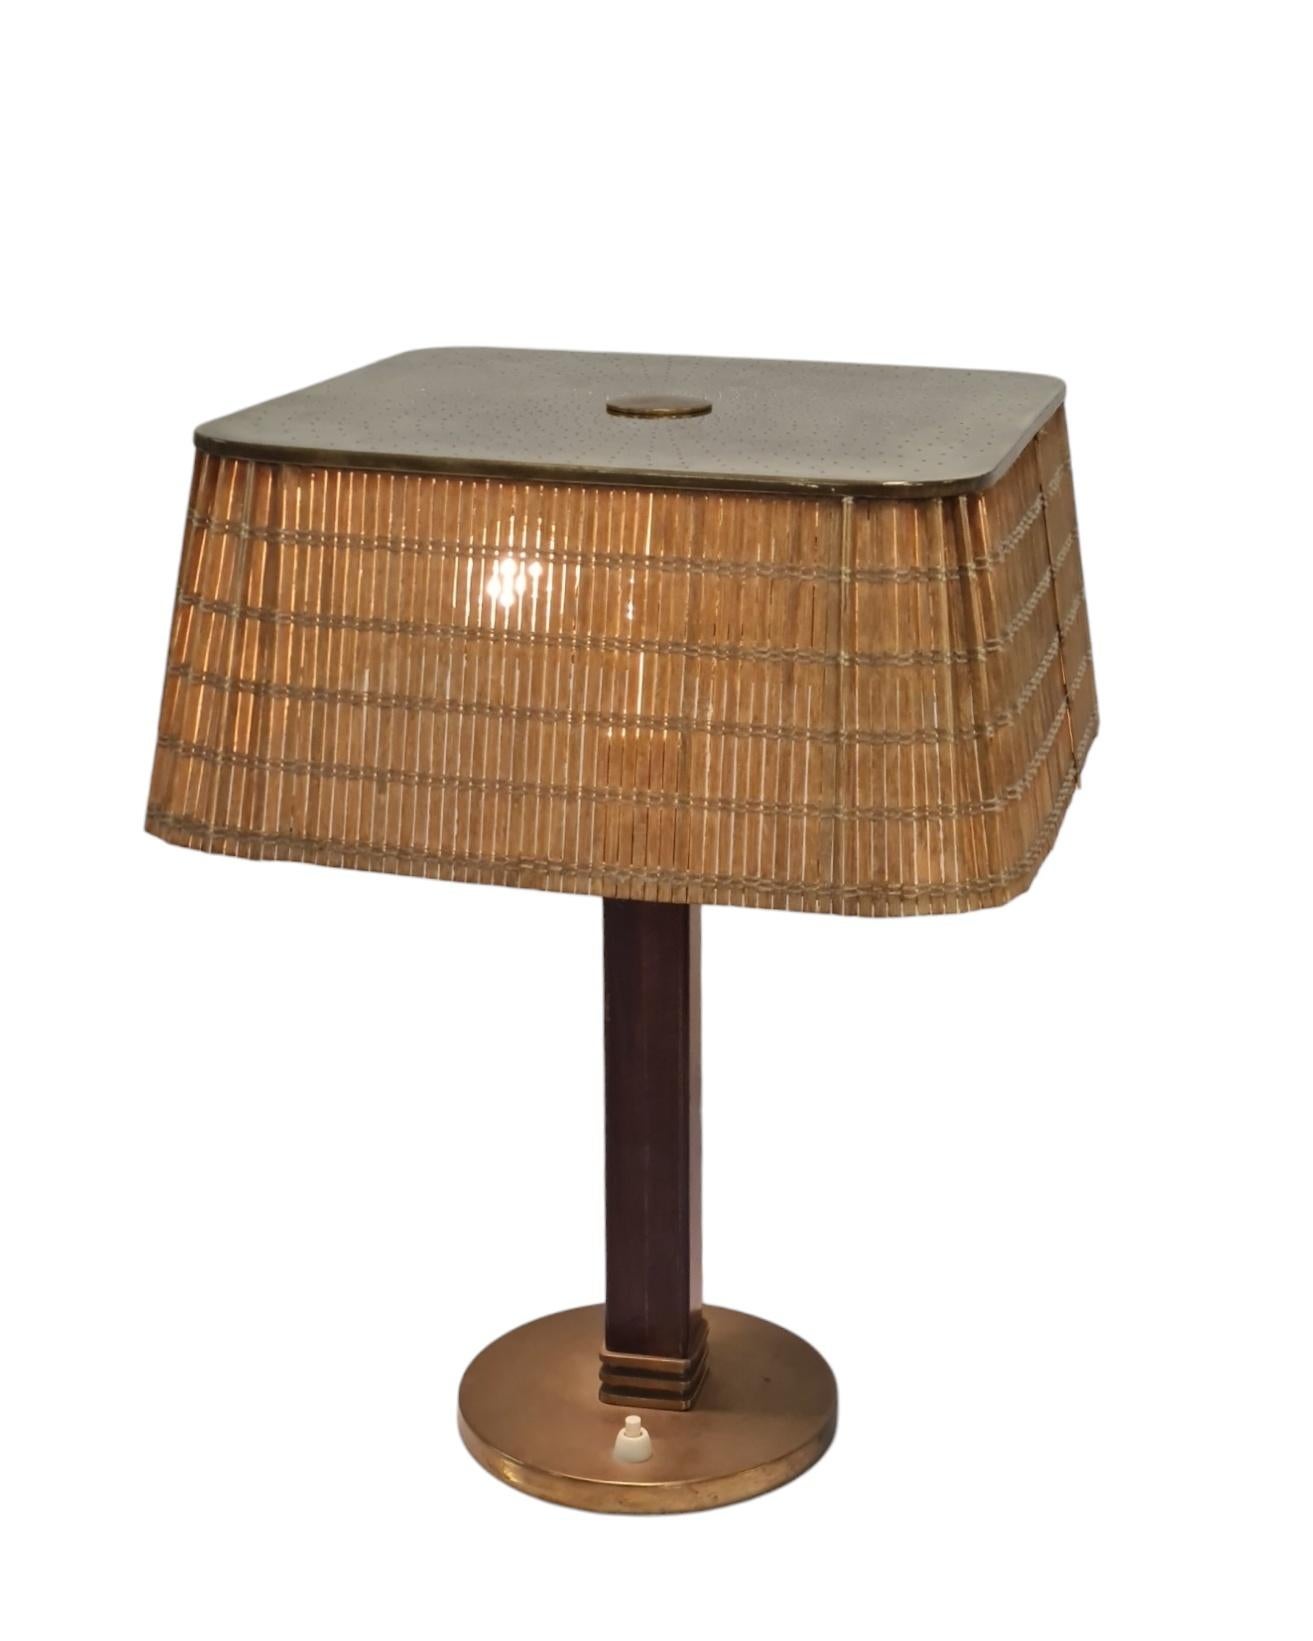 Finnish Paavo Tynell, Table Lamp Model 5066, Taito Oy For Sale